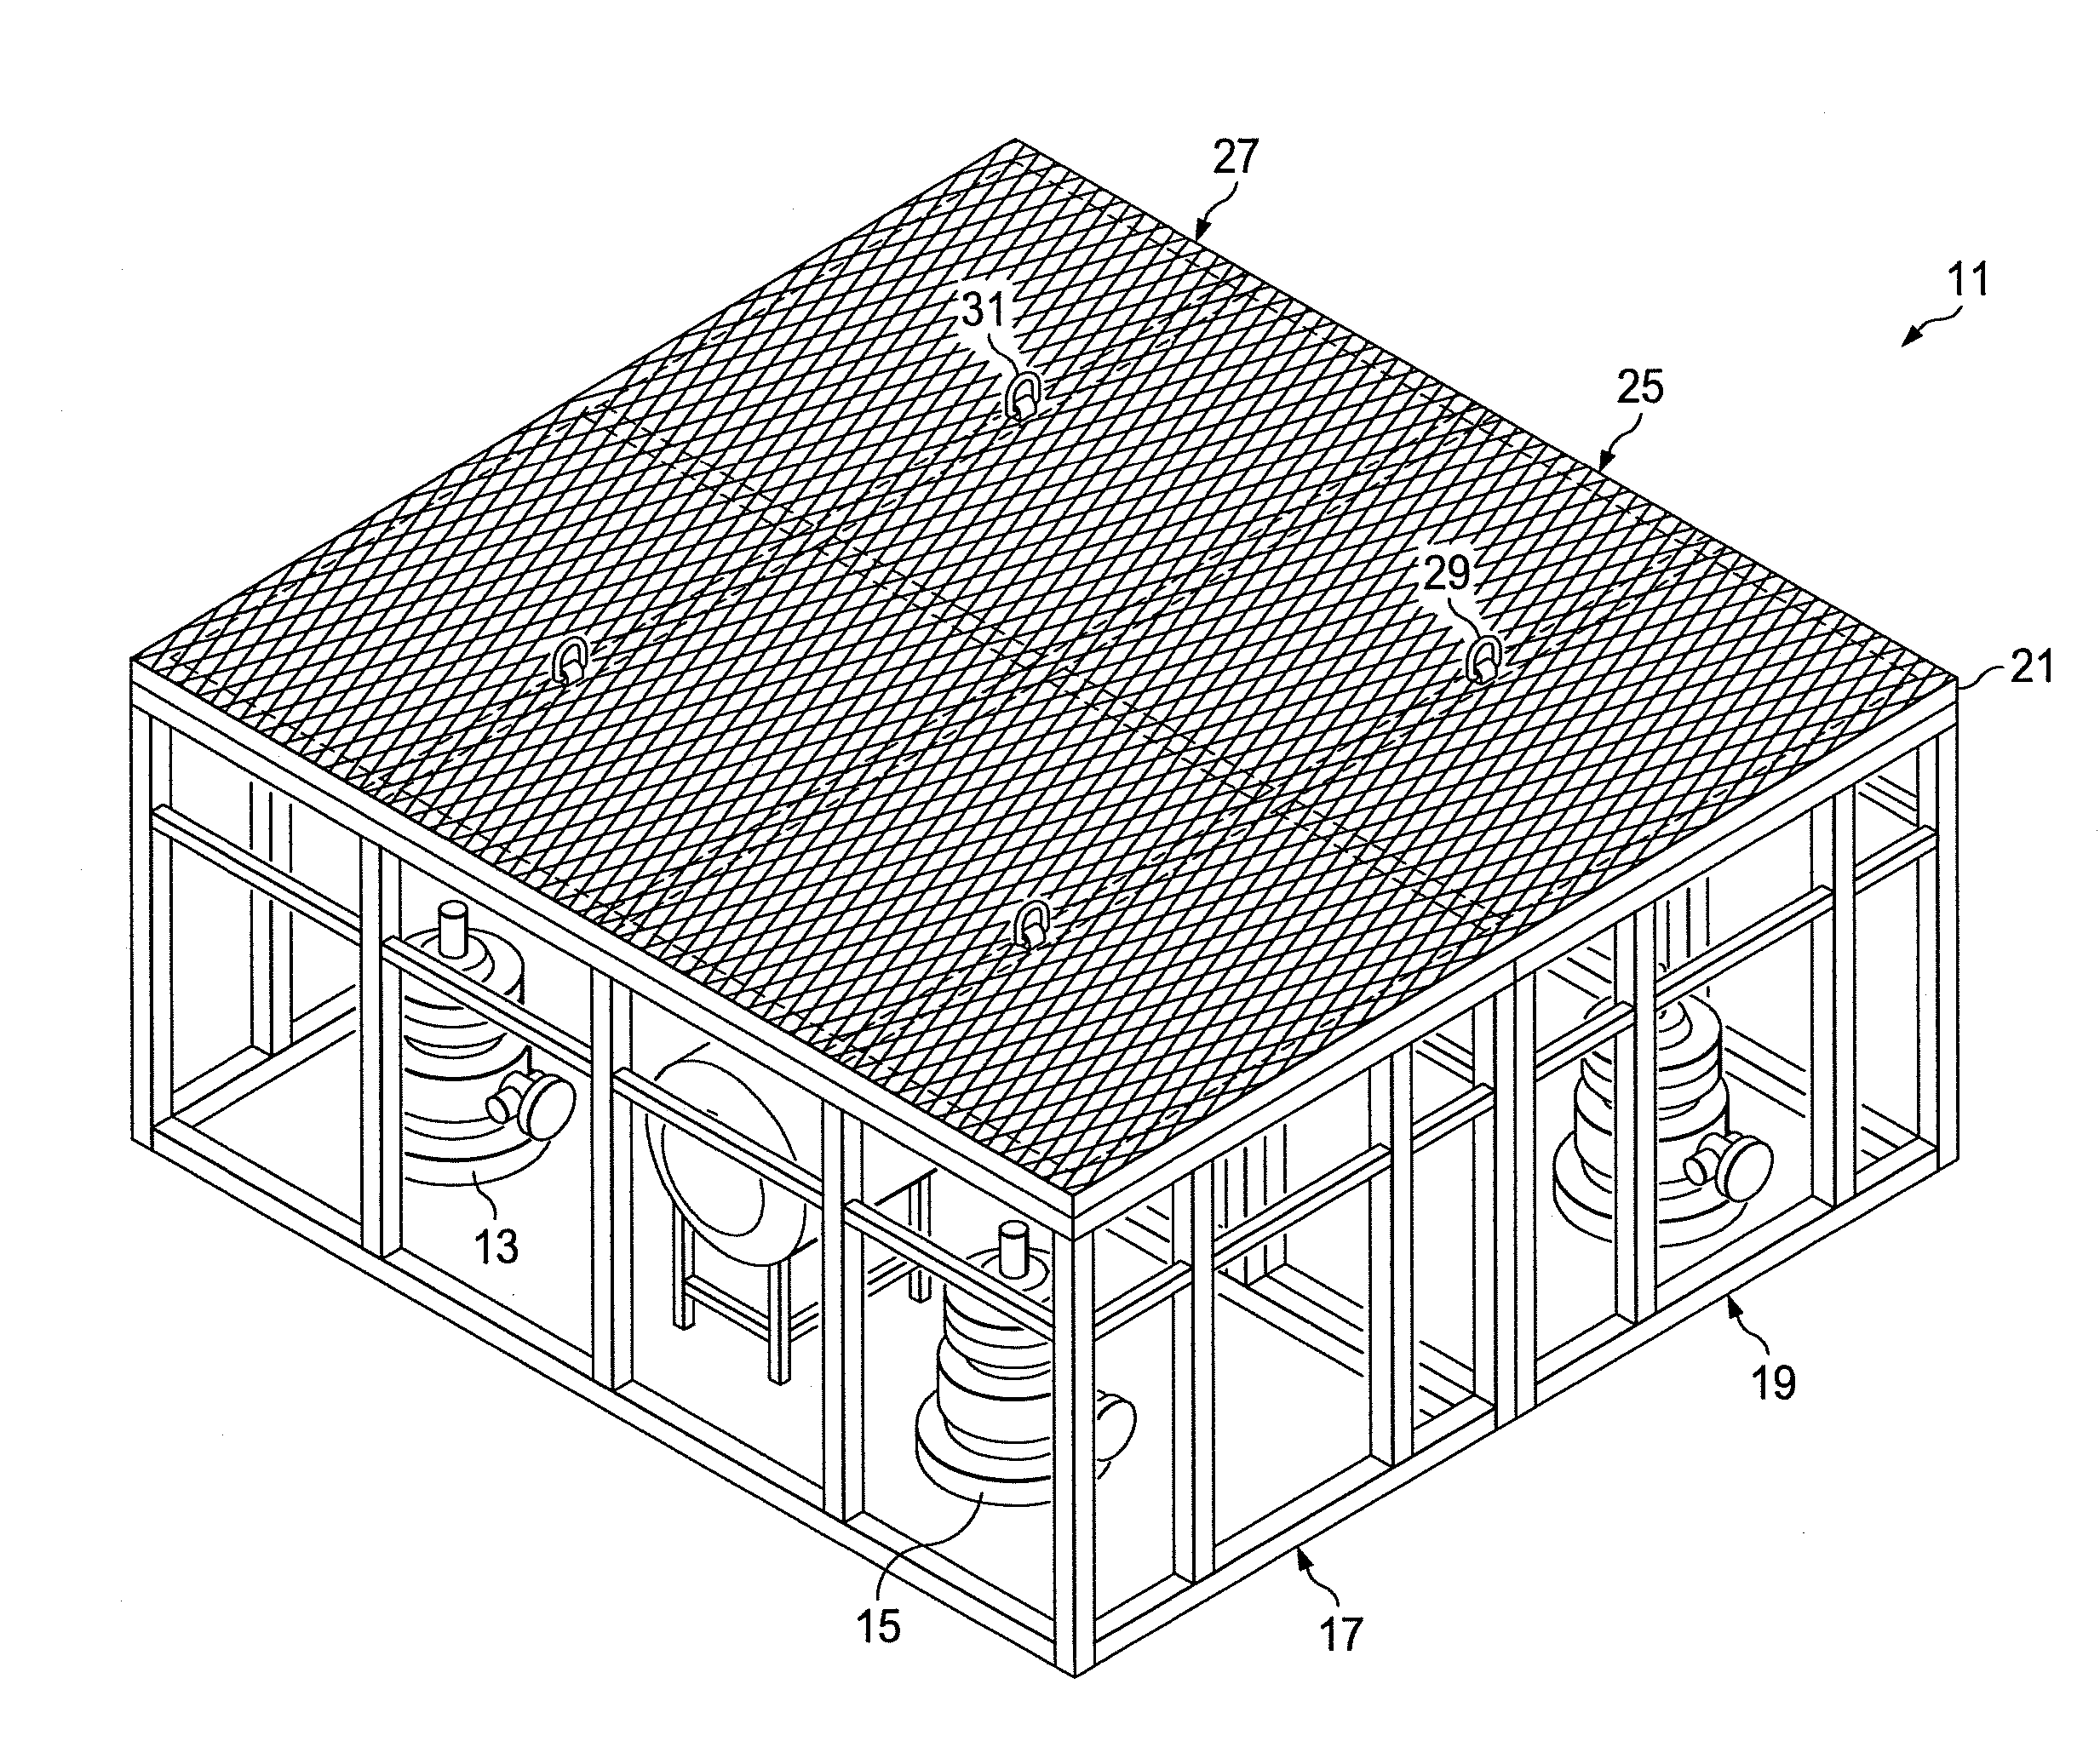 Protective Enclosure for a Wellhead